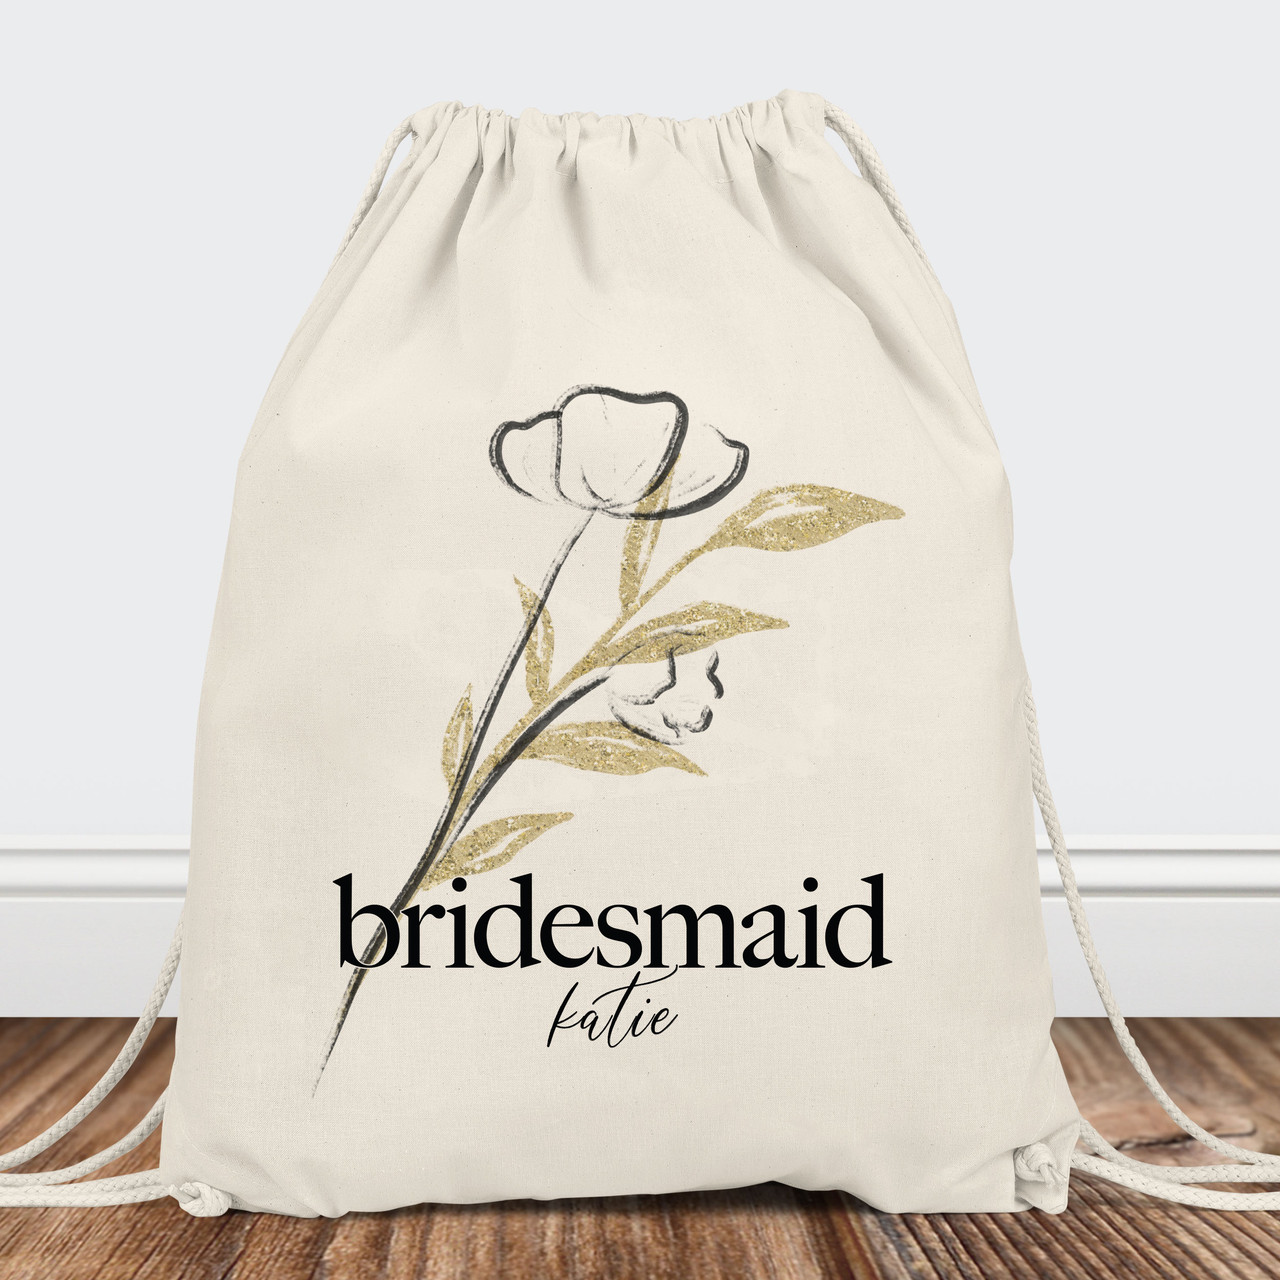 Personalized Floral Initial Canvas Tote Bag for Everyday Use Bridesmaid  Bachelorette Party Gift, Bride Maid of Honor Wedding Birthday Gift